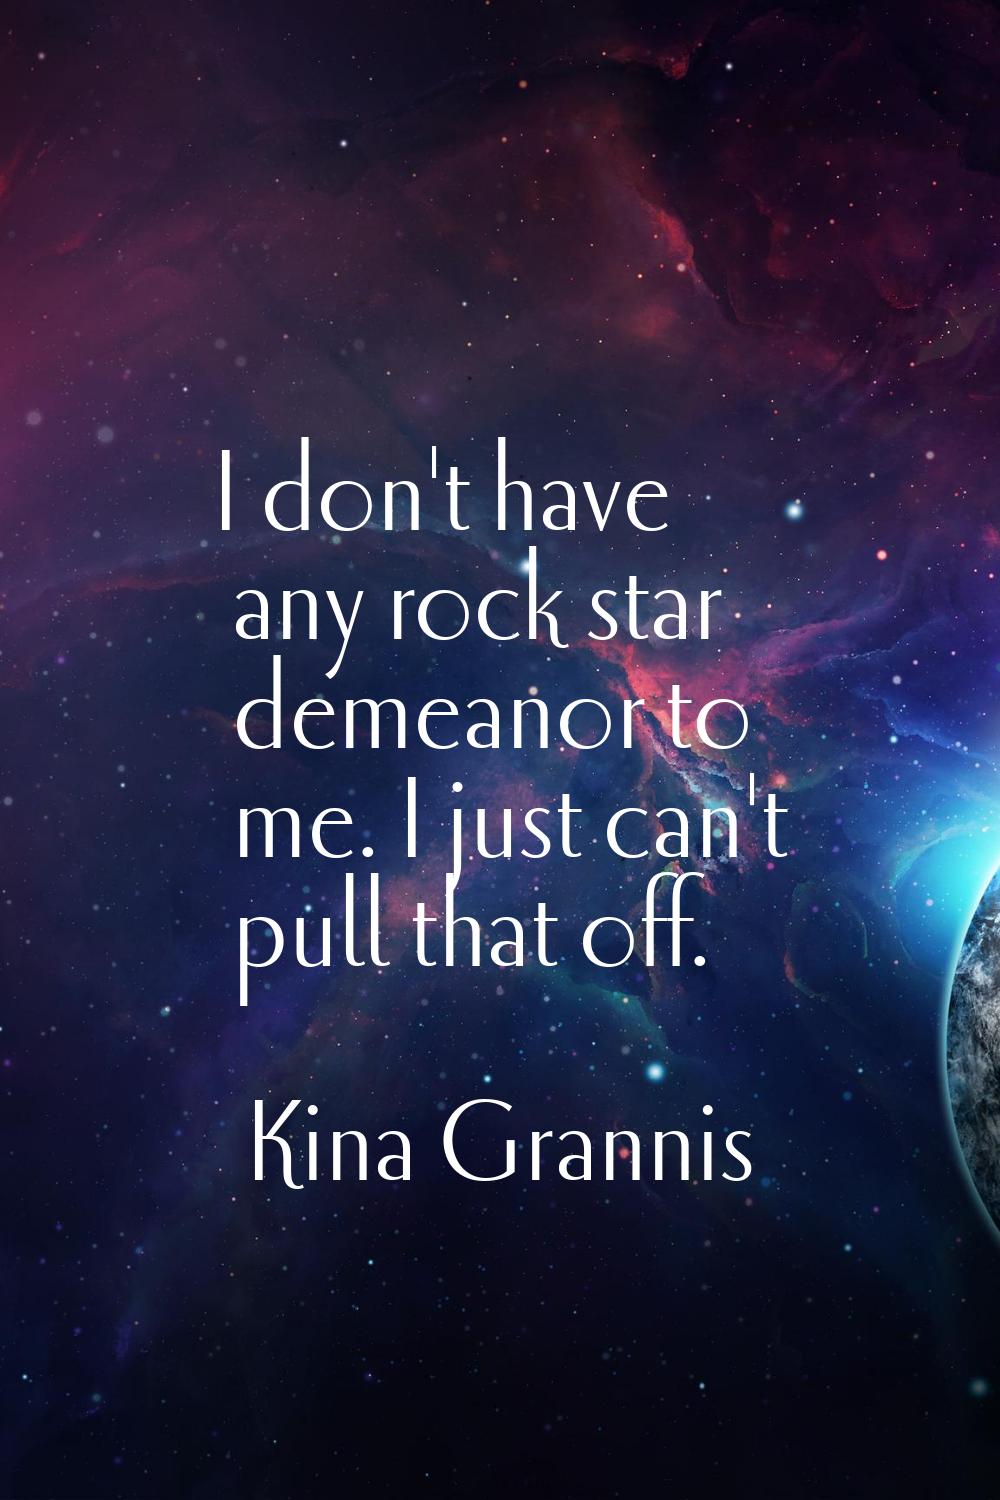 I don't have any rock star demeanor to me. I just can't pull that off.